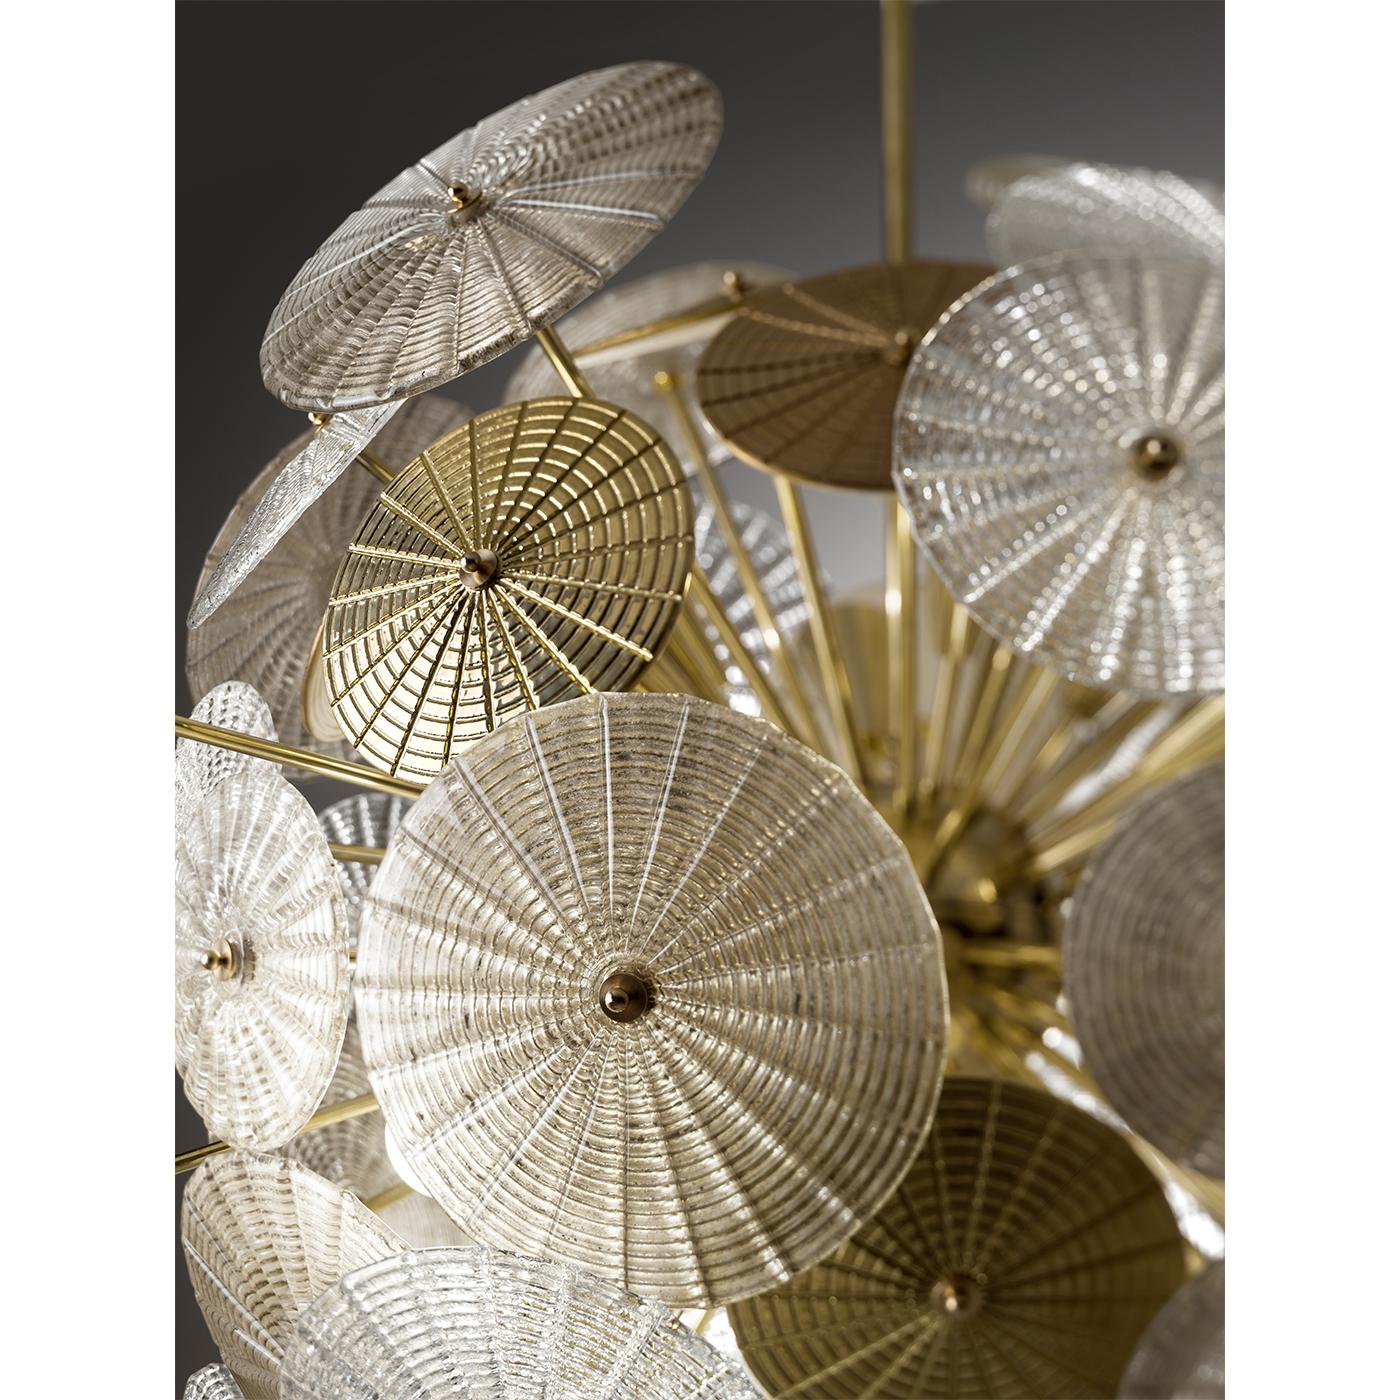 Masterfully translating into a contemporary design the delicate silhouette of a dandelion, this chandelier is a superb object of functioning decor. It features 16 lights and a spherical shape that combines a brass structure with porcelain and